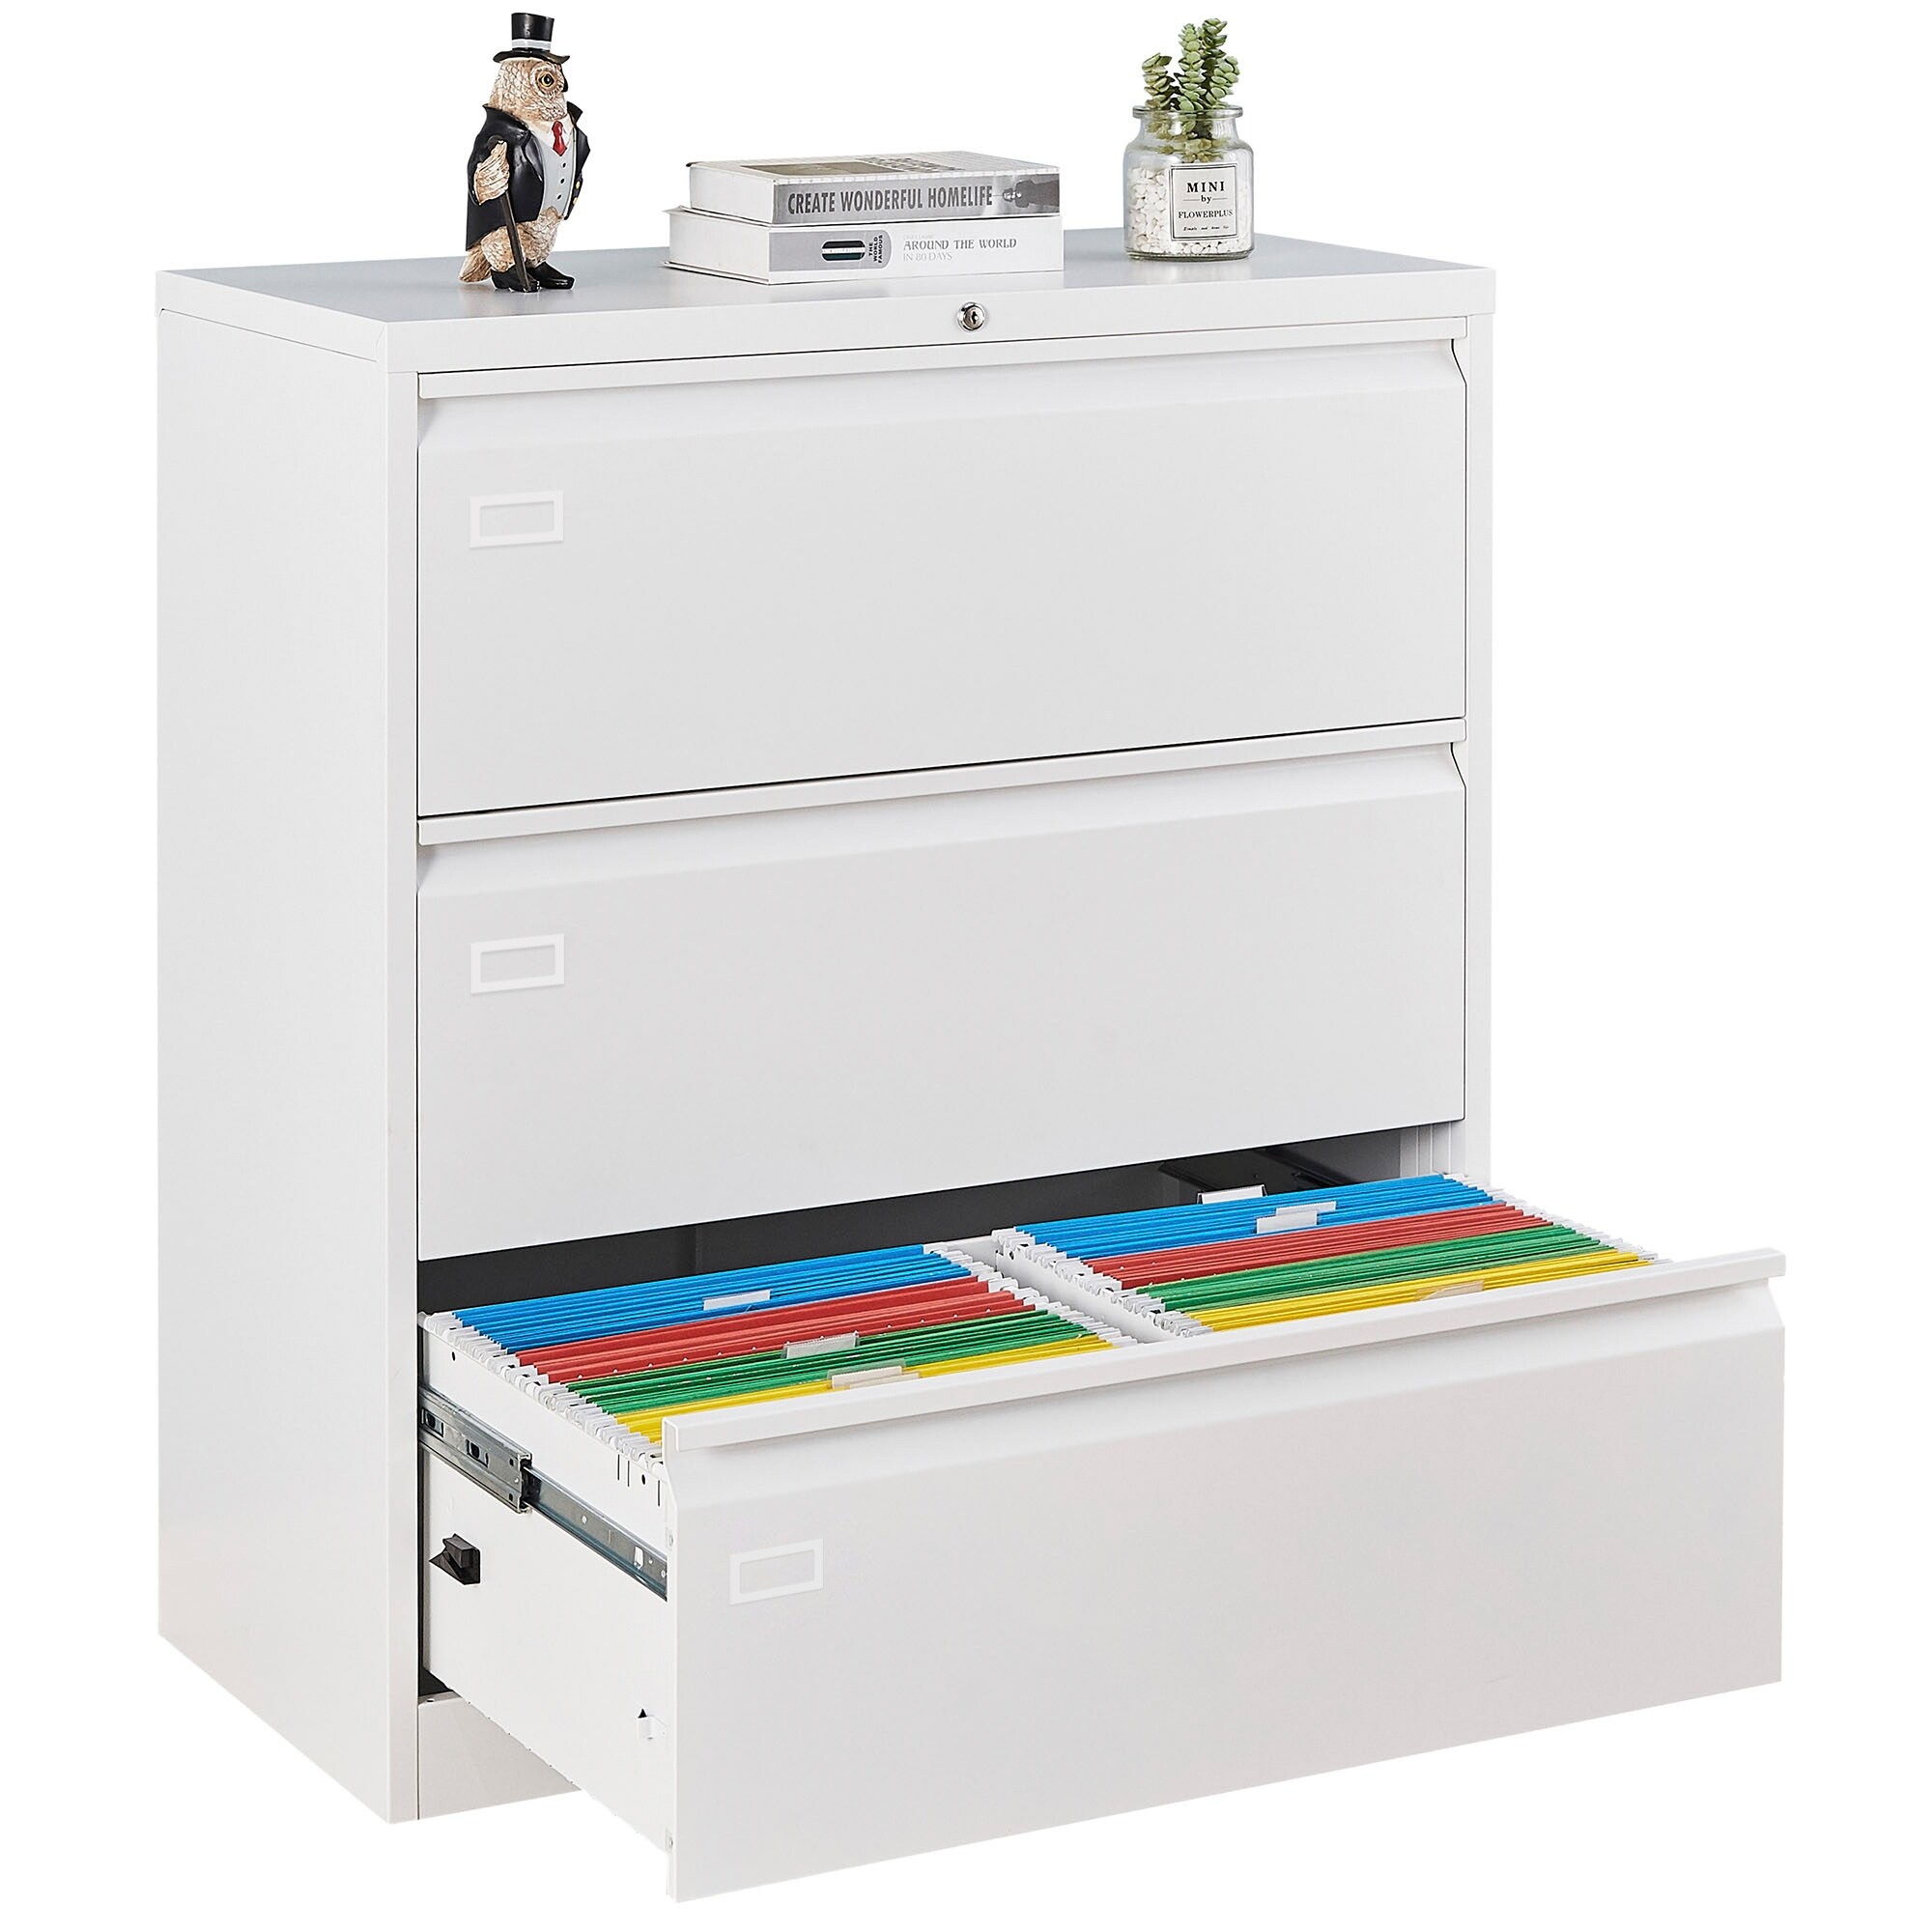 AOBABO 3 Drawer Lateral File Cabinet with Lock for Letter Sized